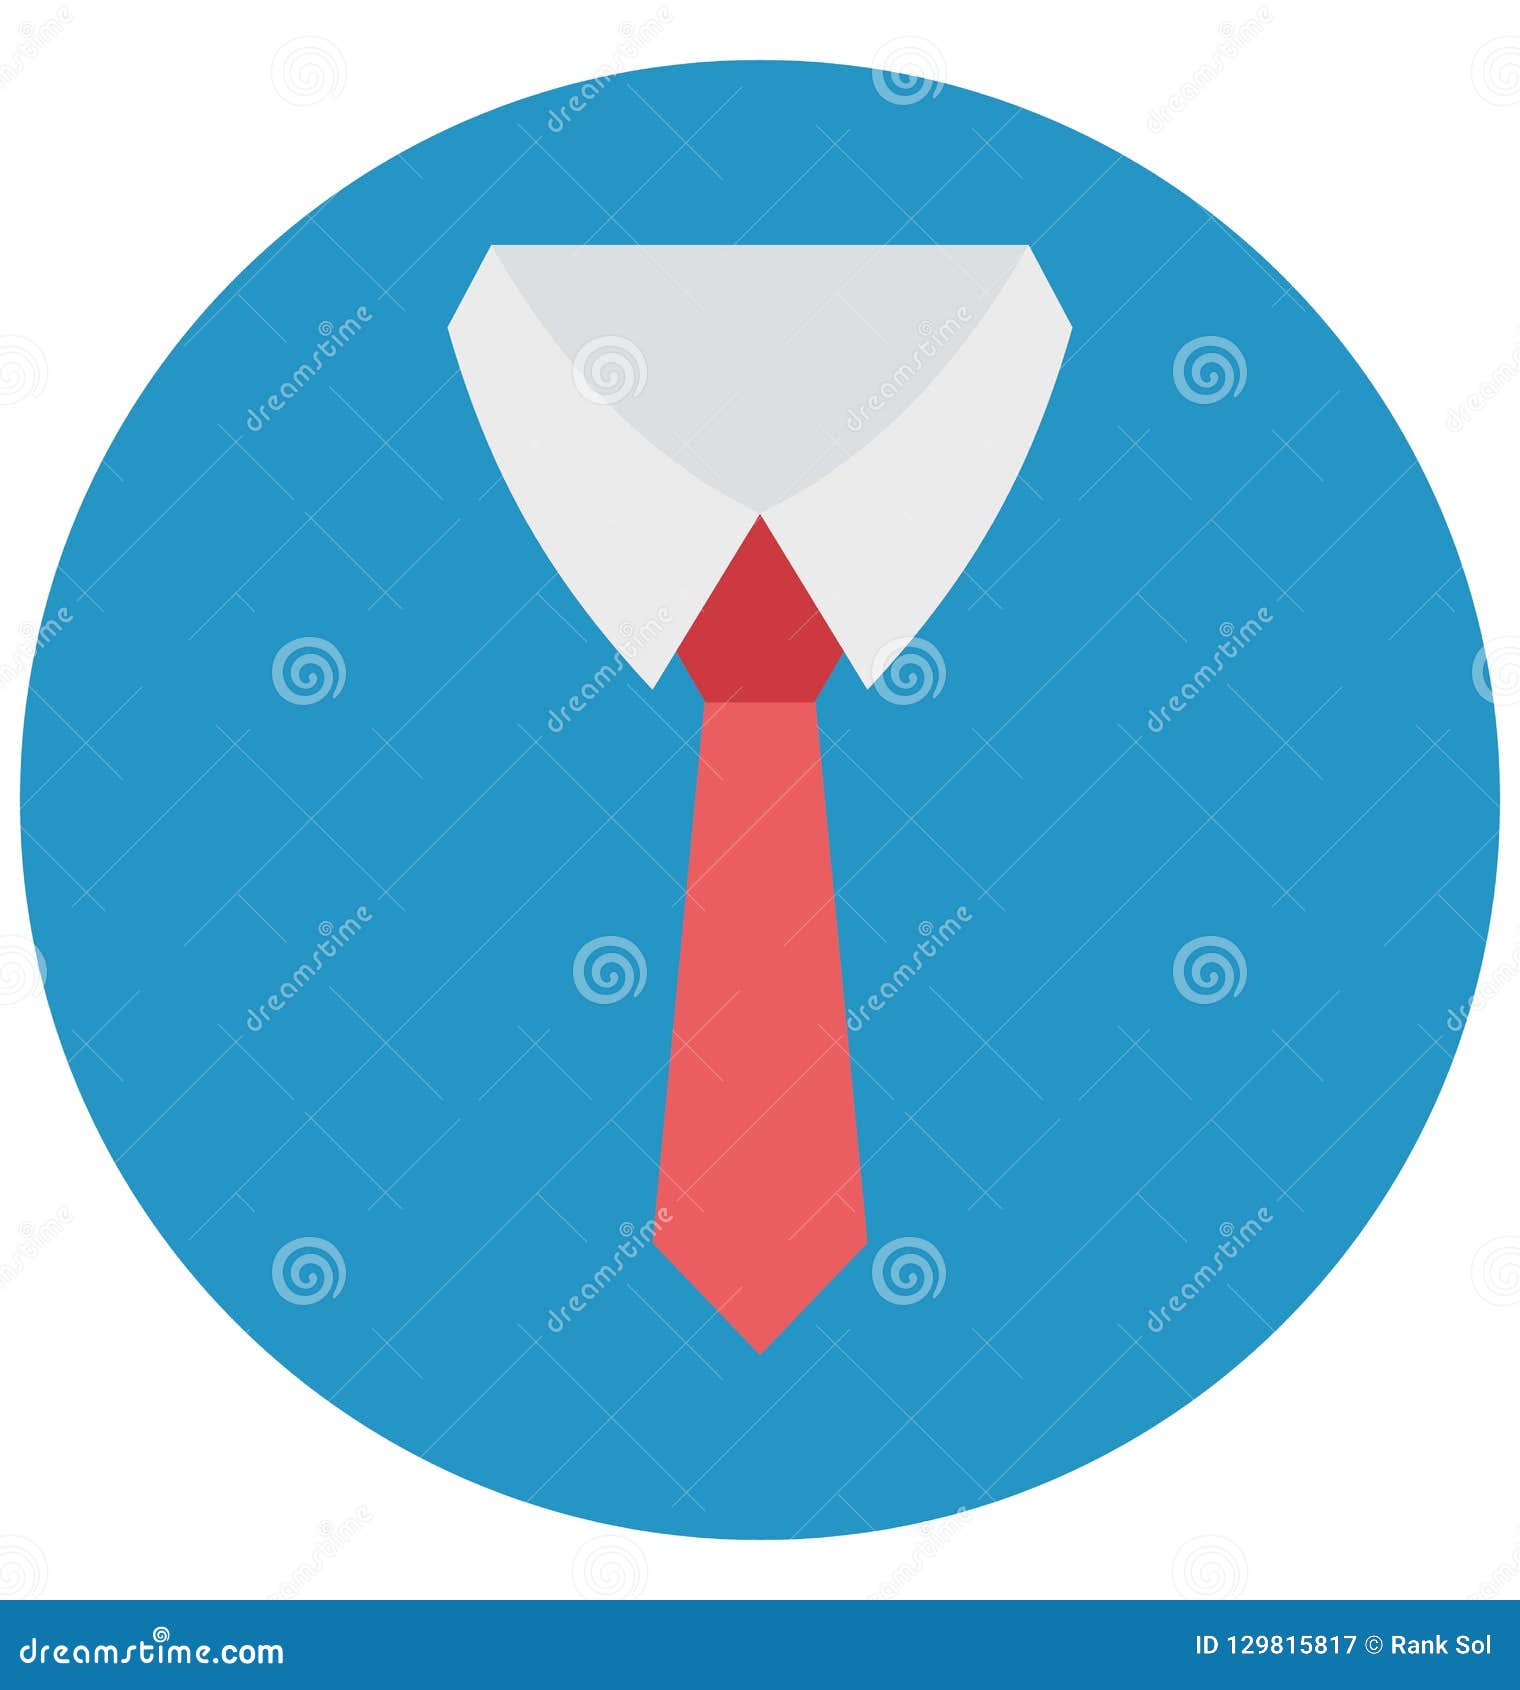 Suit, Tie, Tuxedo, Isolated Vector Icons that Can Be Easily Modified or ...